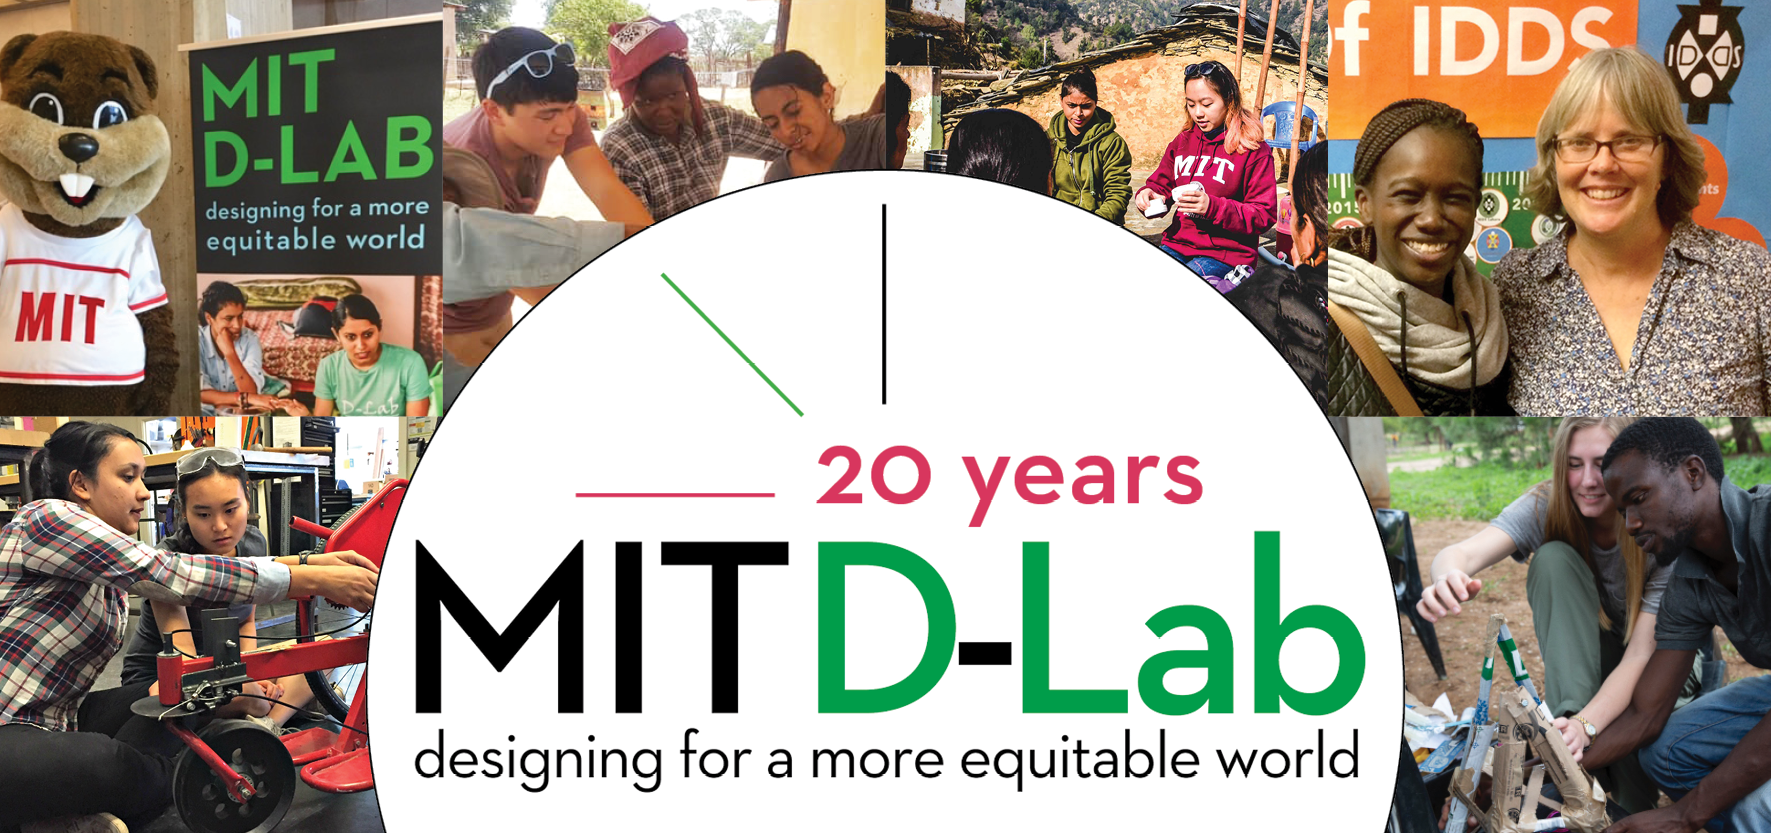 Join us for D-Lab's 20th Anniversary Events on October 21!